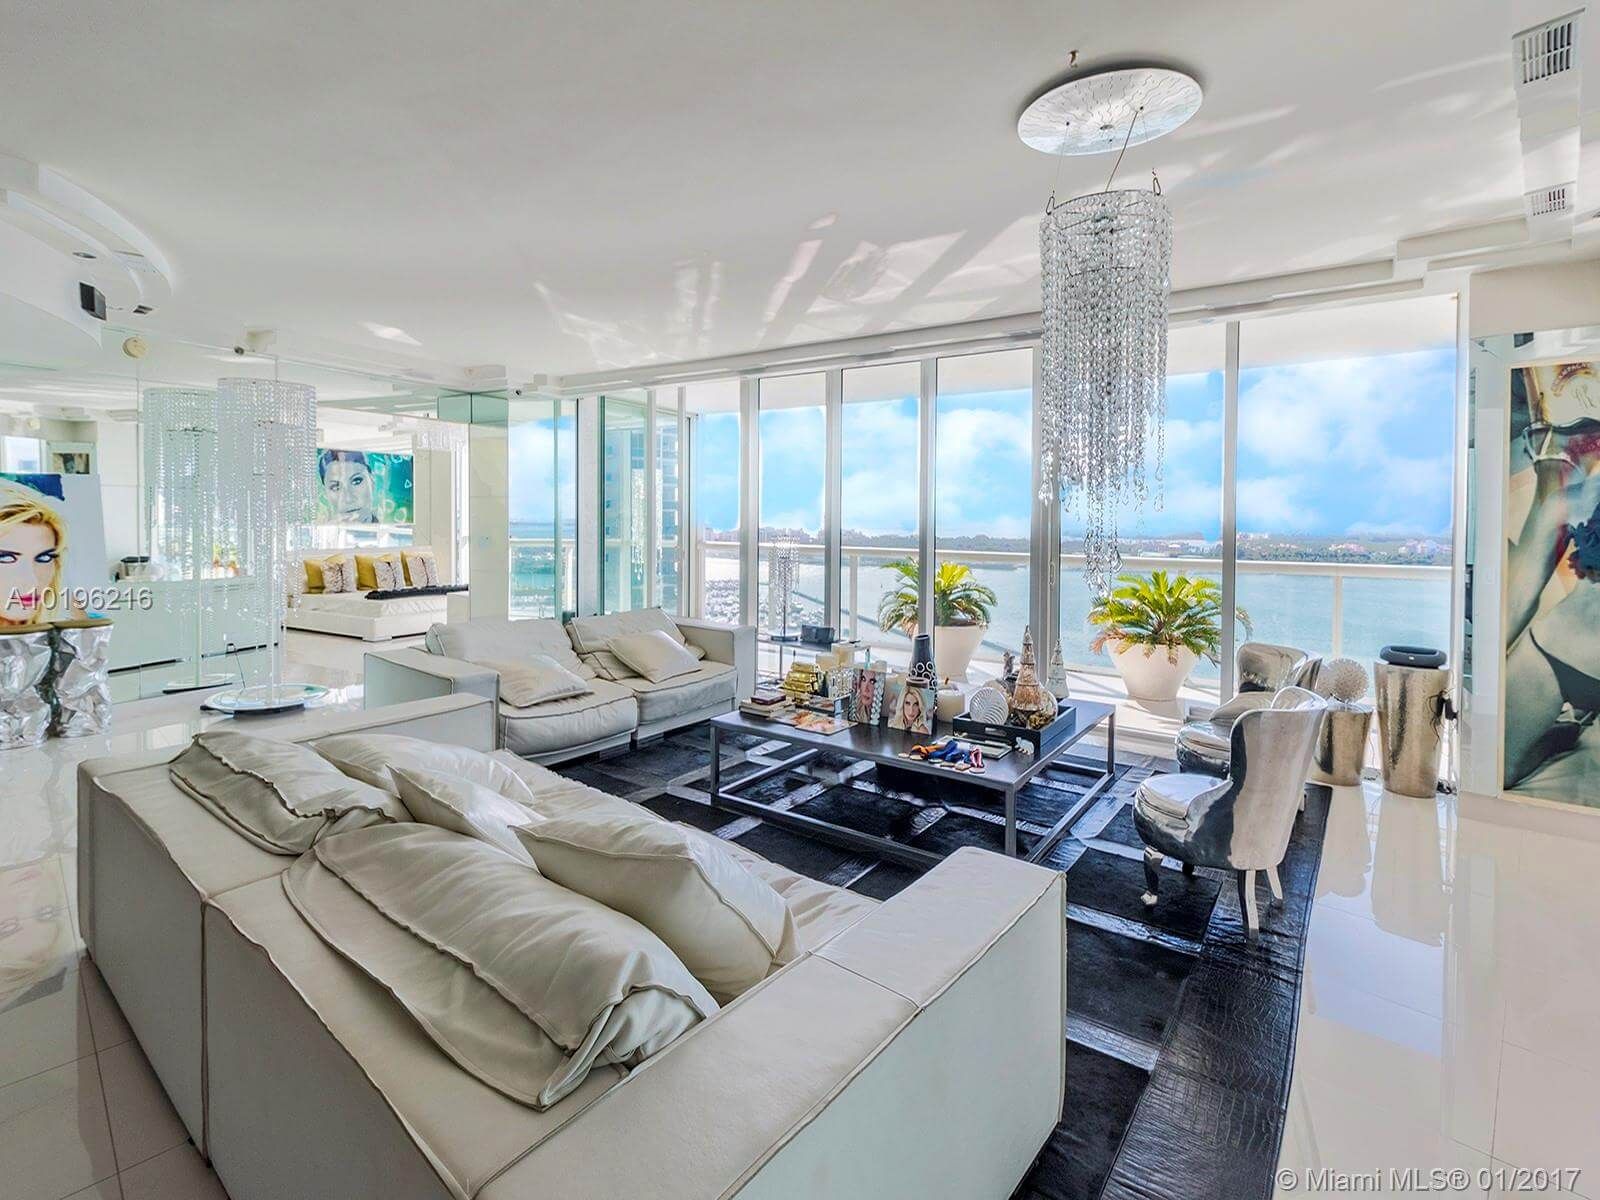 Icon South Beach - First Class Features and Amenities